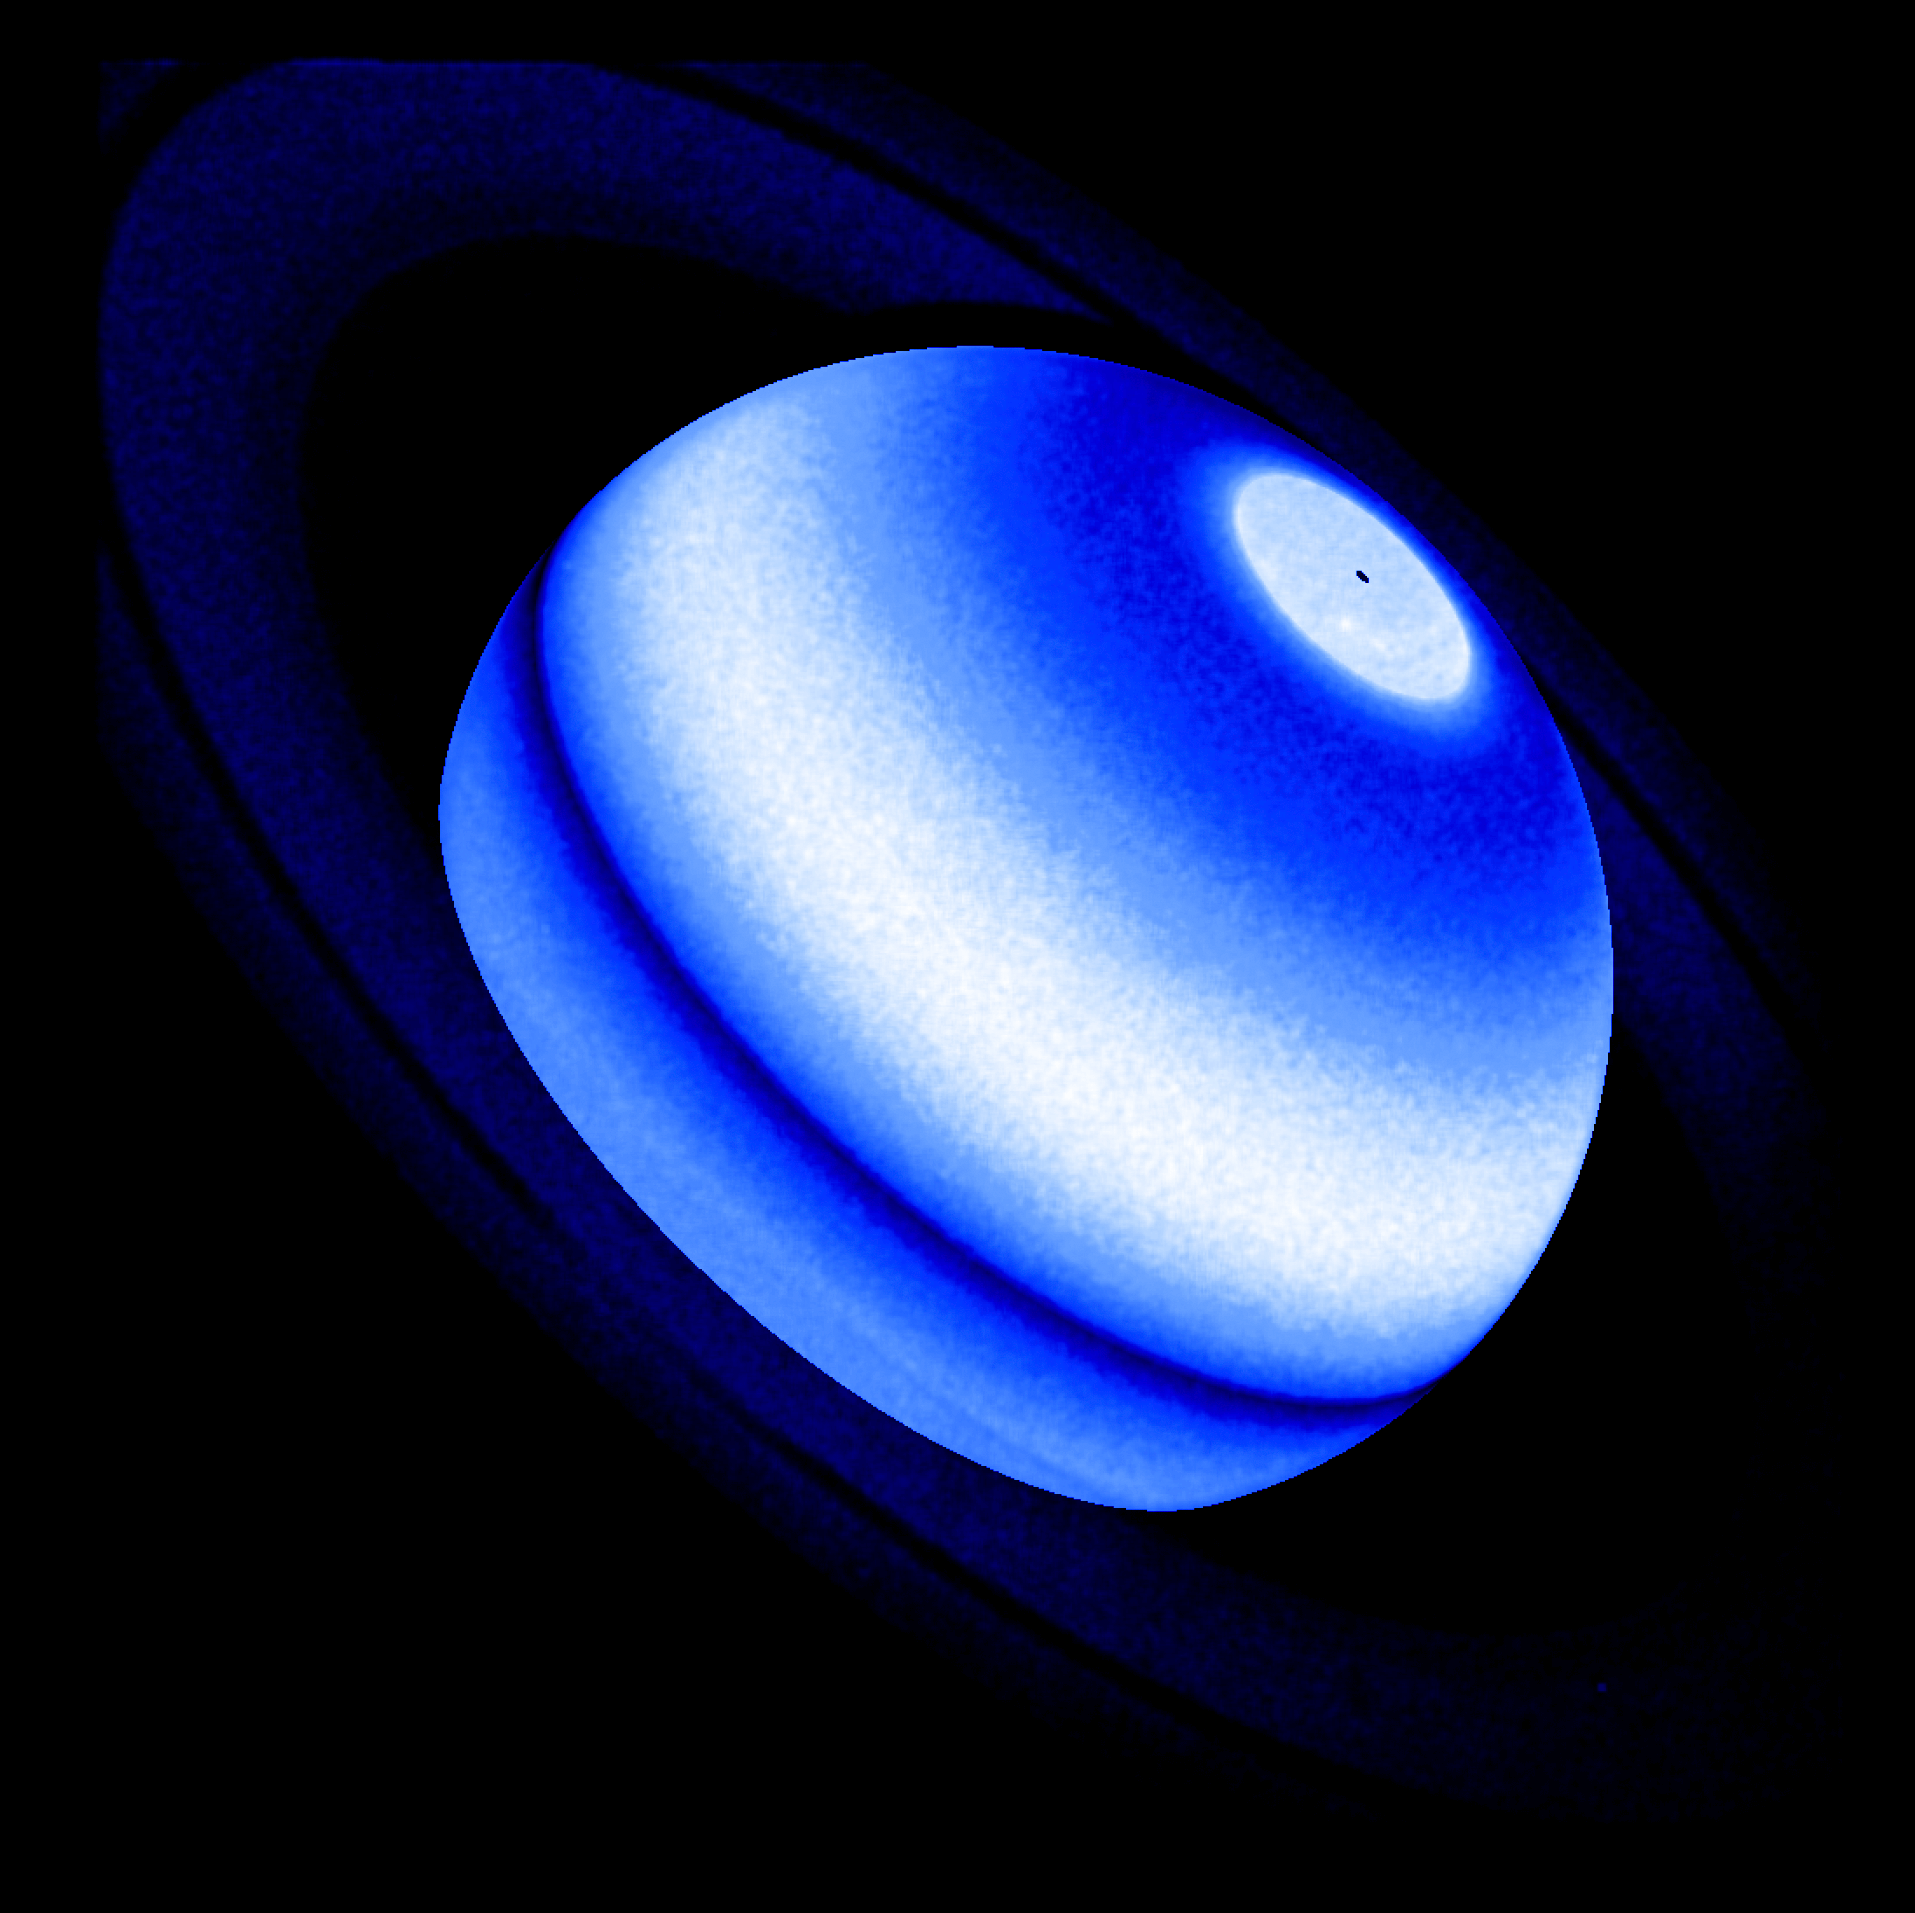 Image of Saturn from the Hubble Telescope